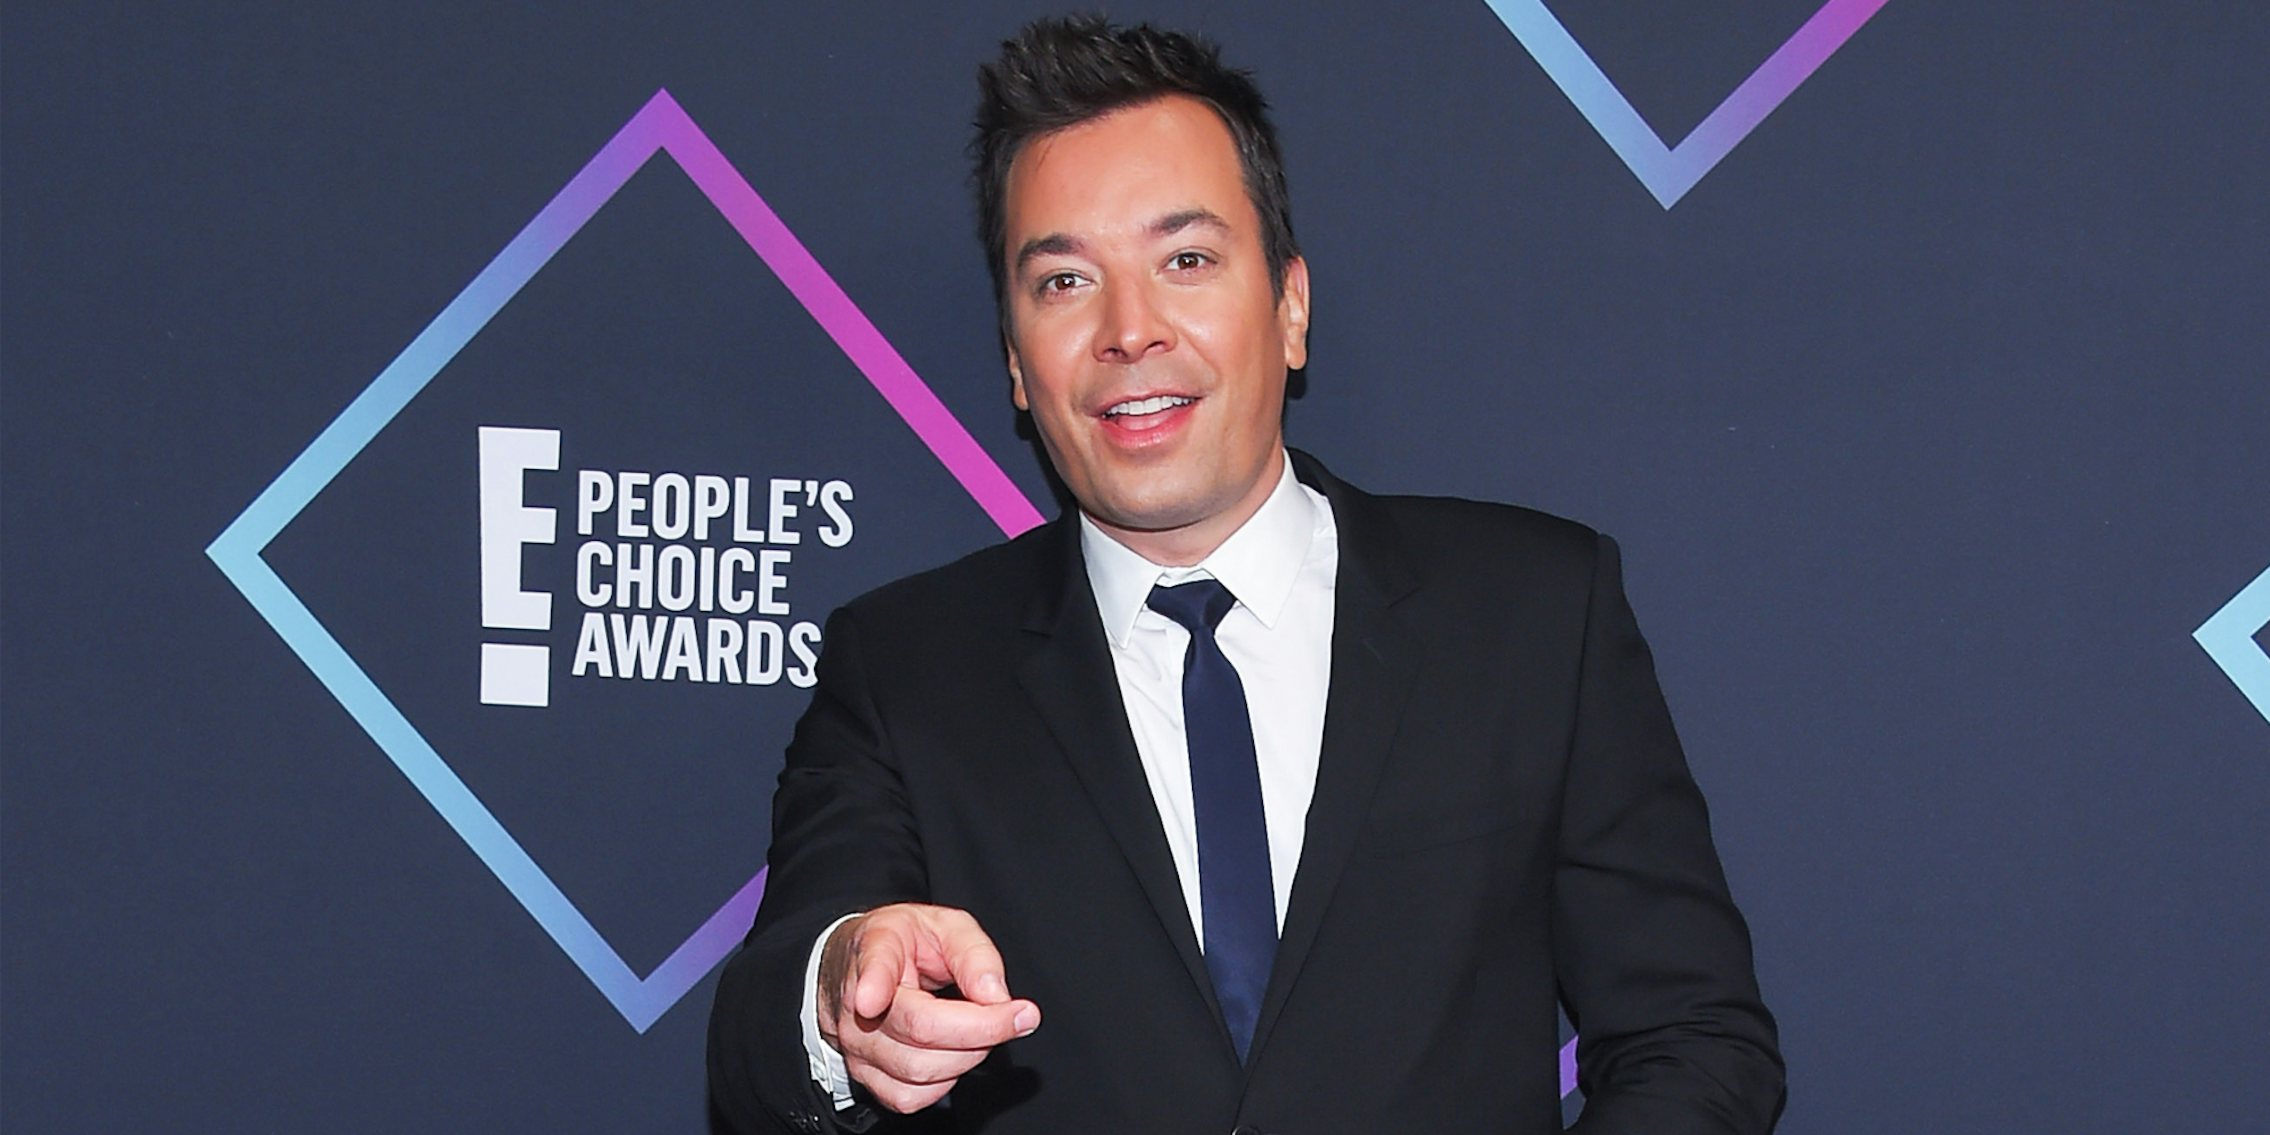 Jimmy Fallon in front of E People's Choice Awards on gray background